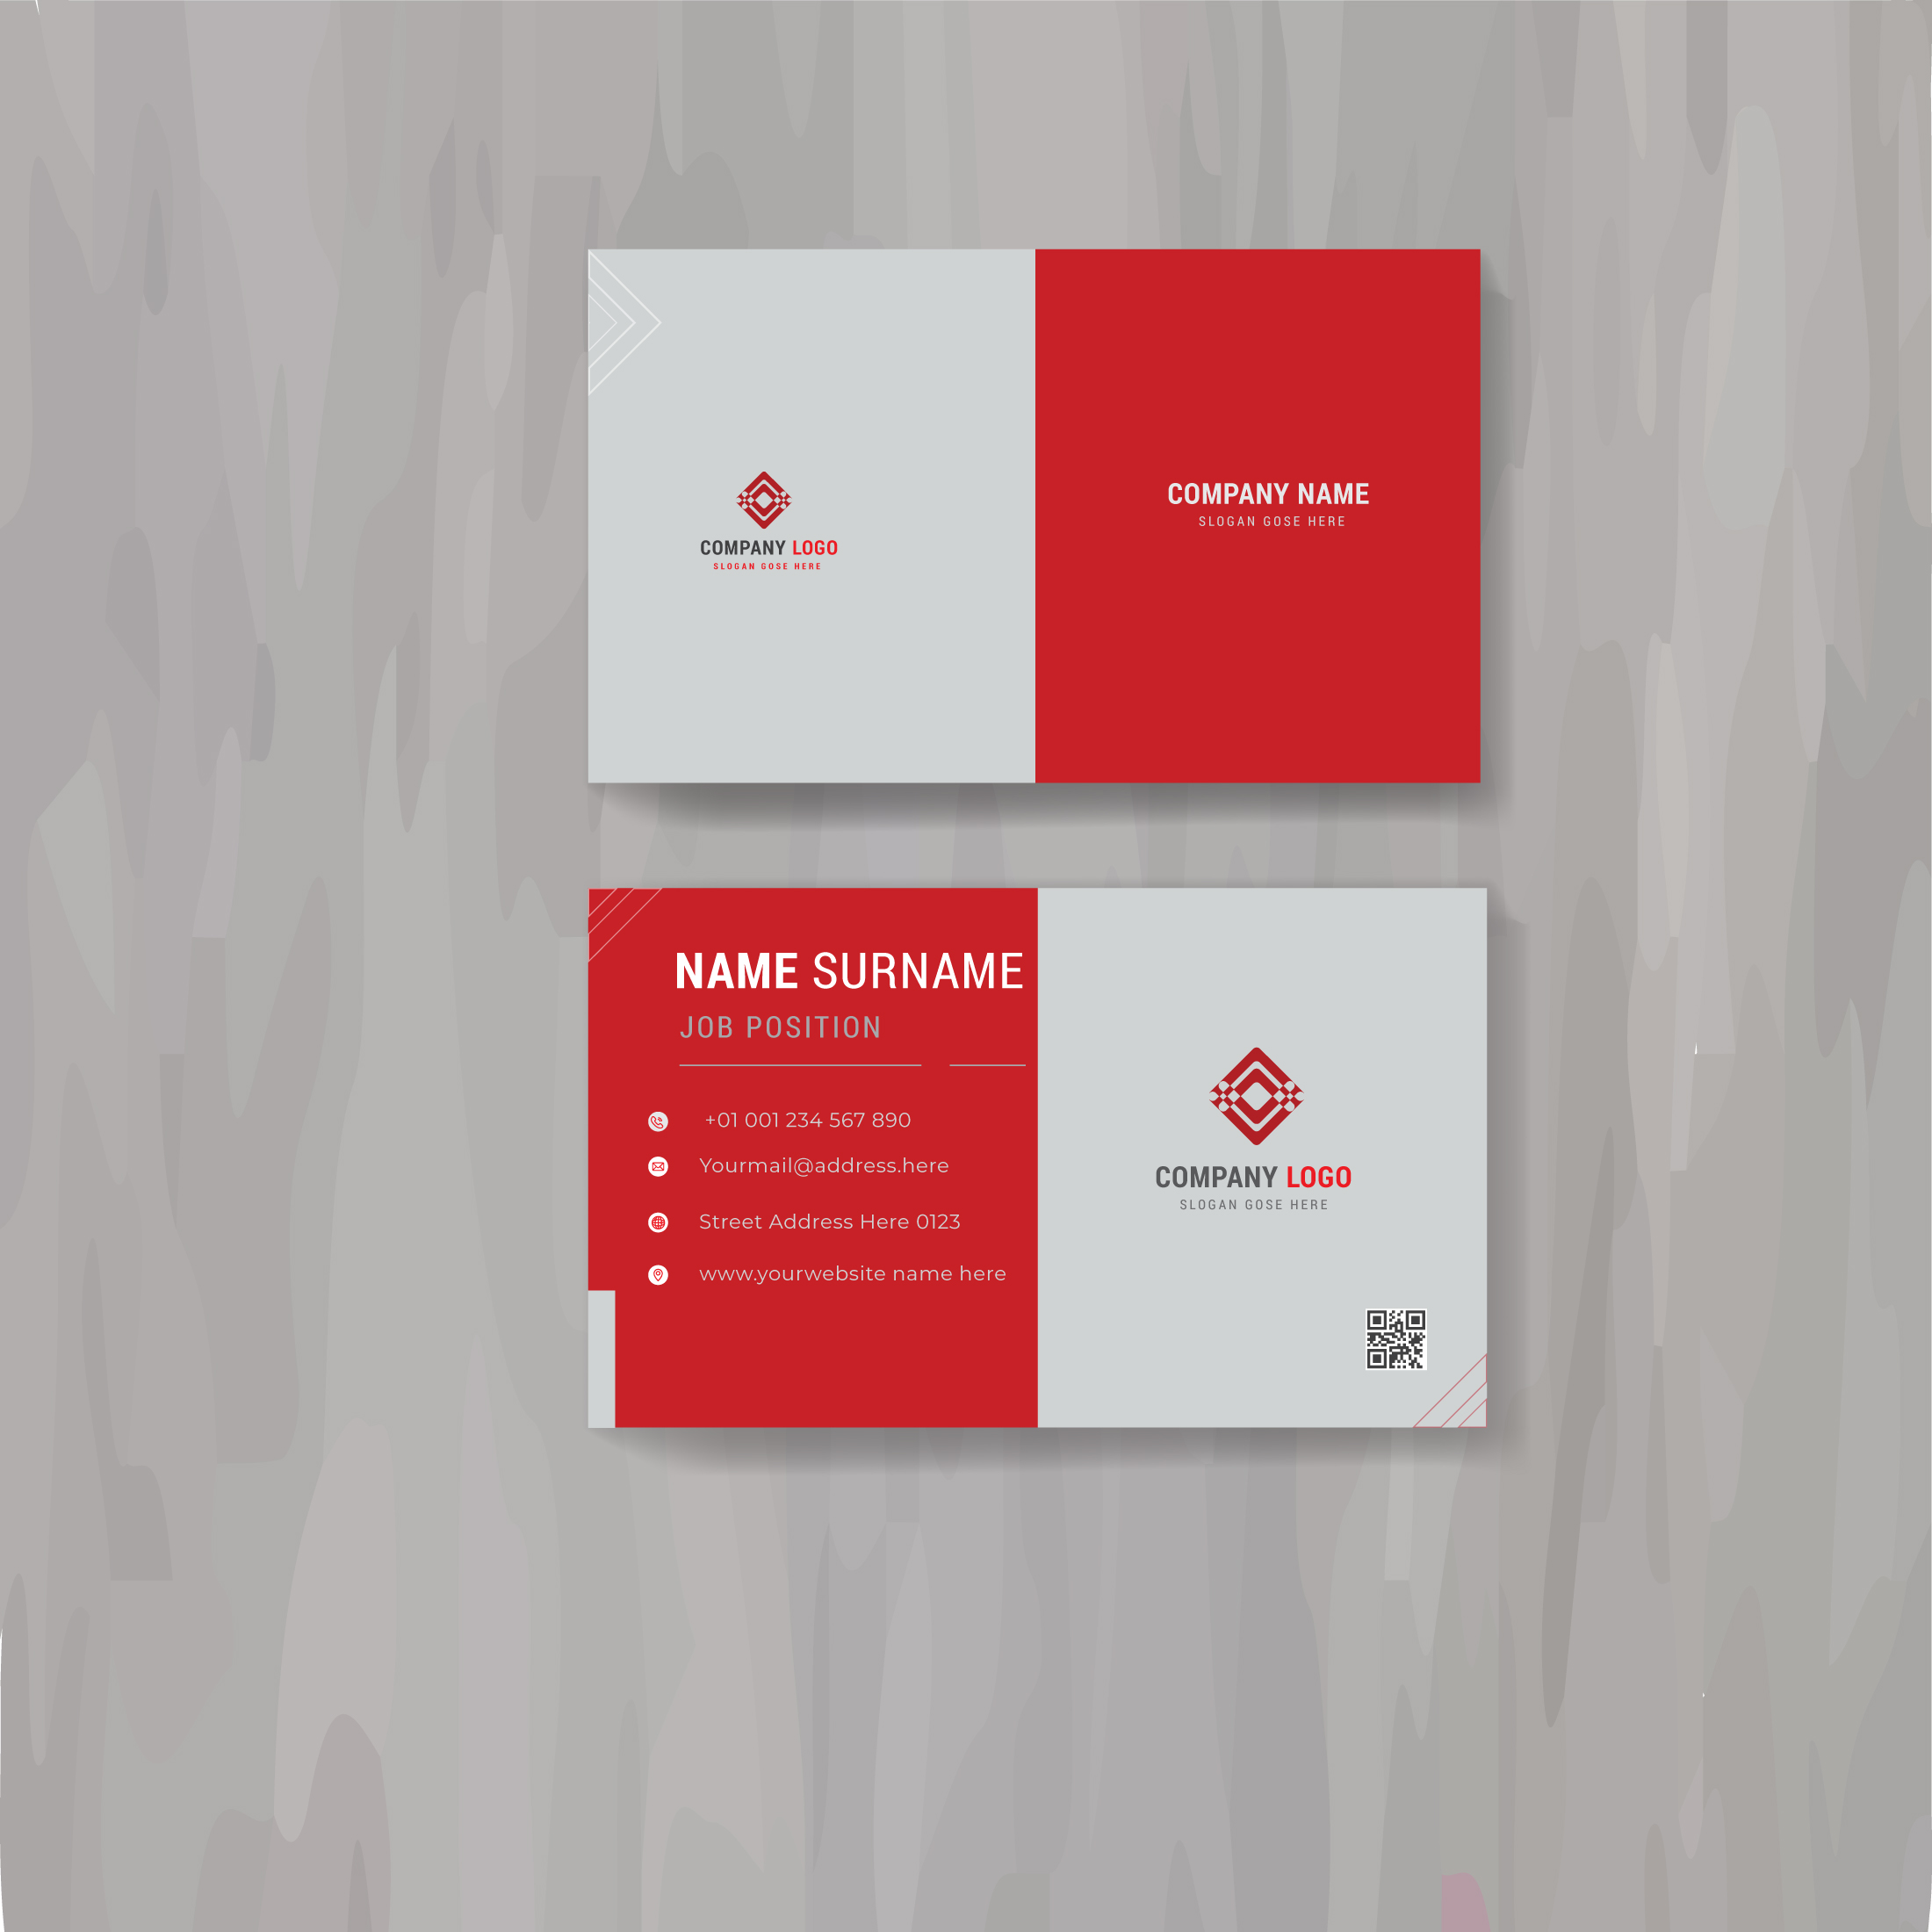 Business card with a red and white design.